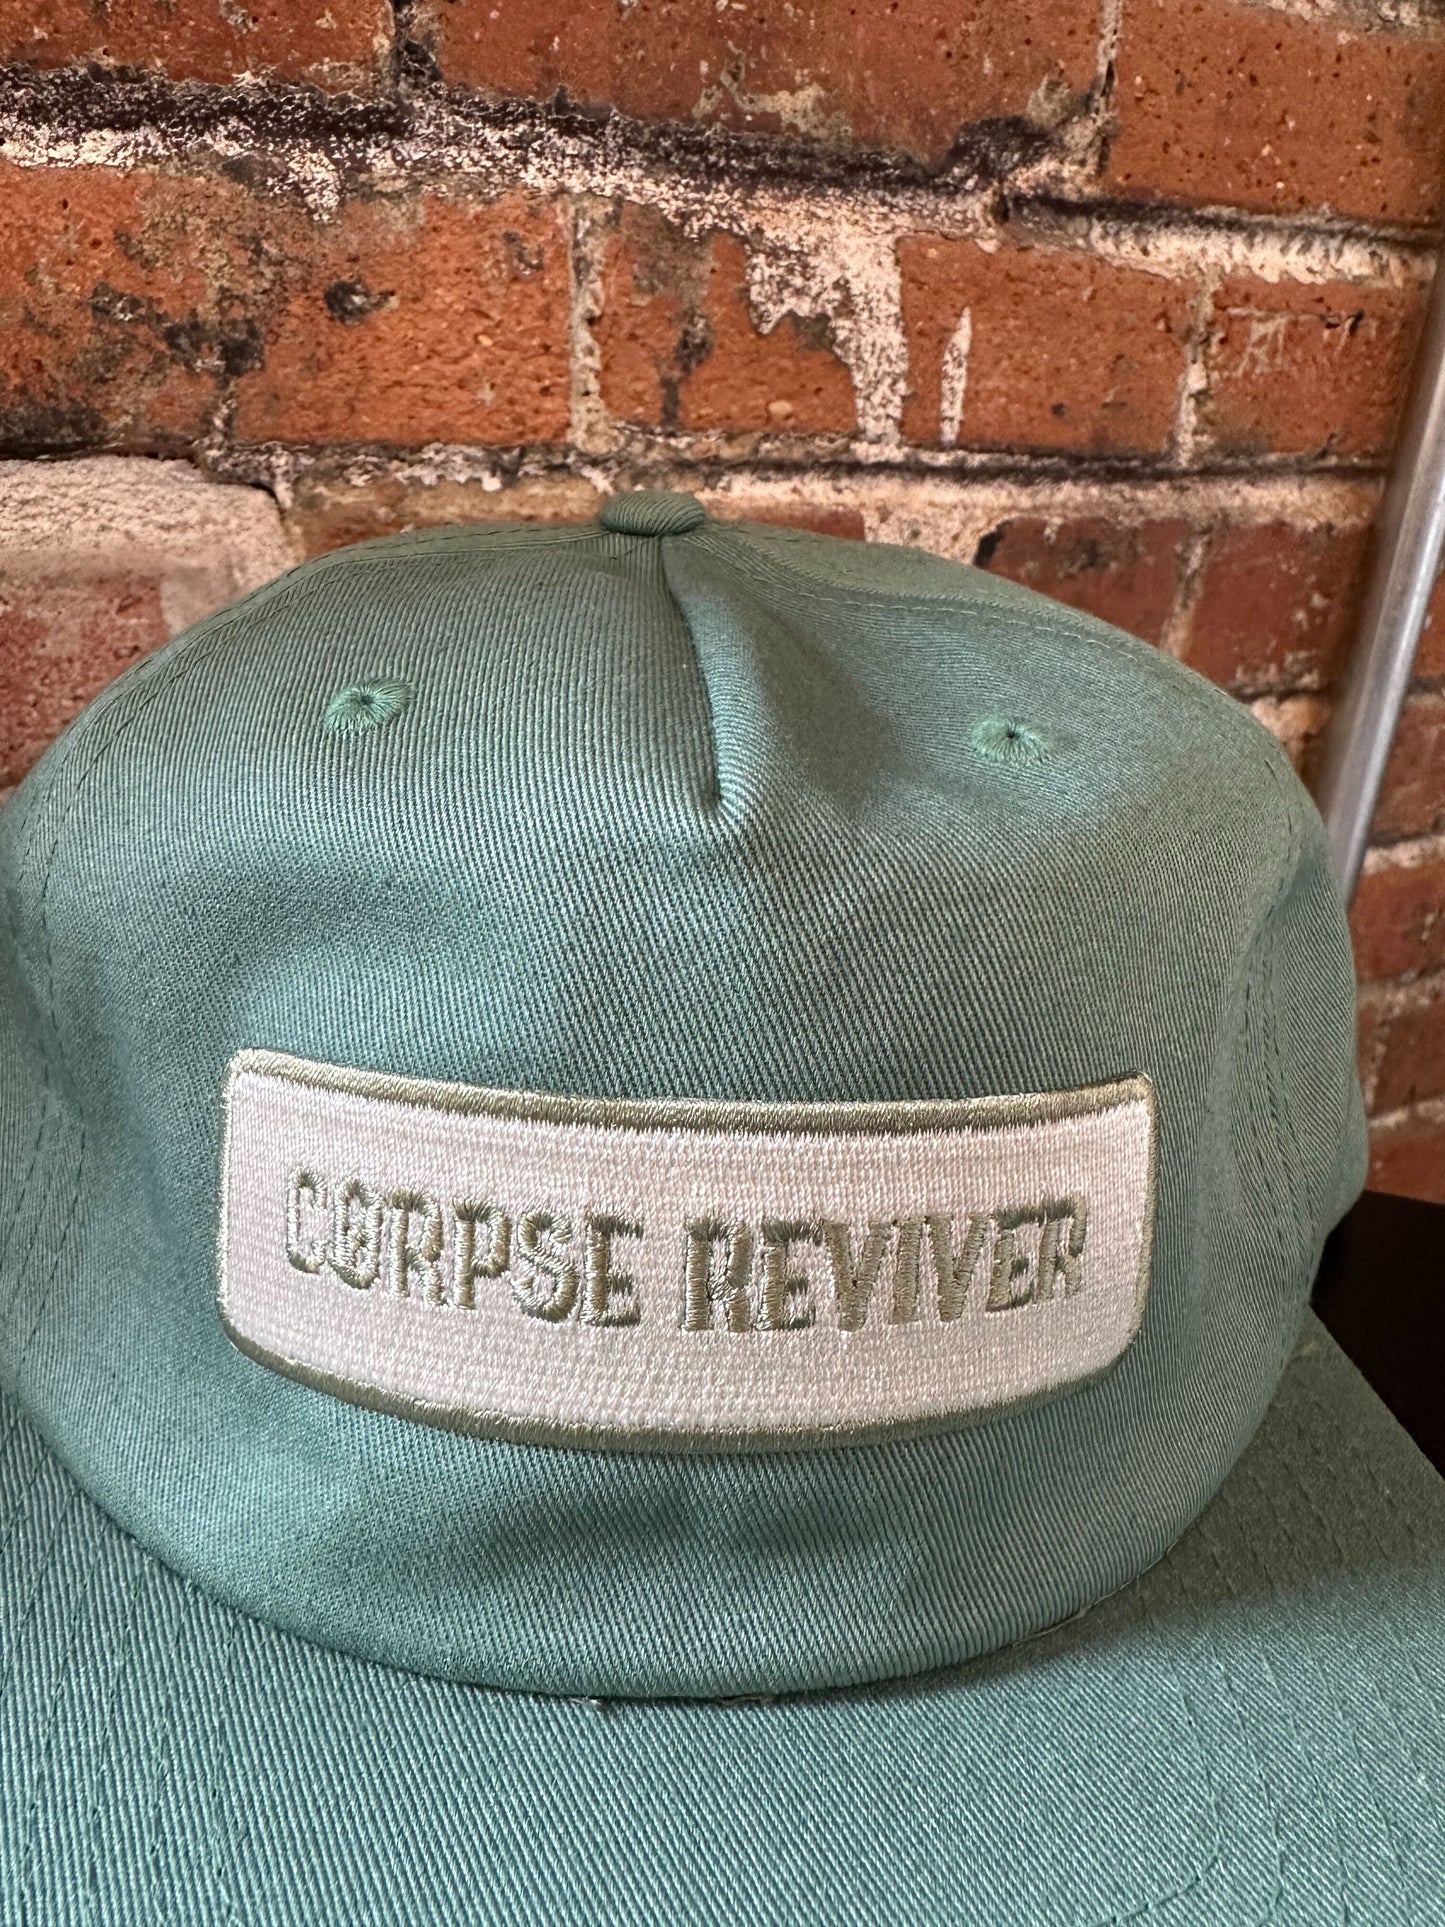 Corpse Reviver Patch Hat